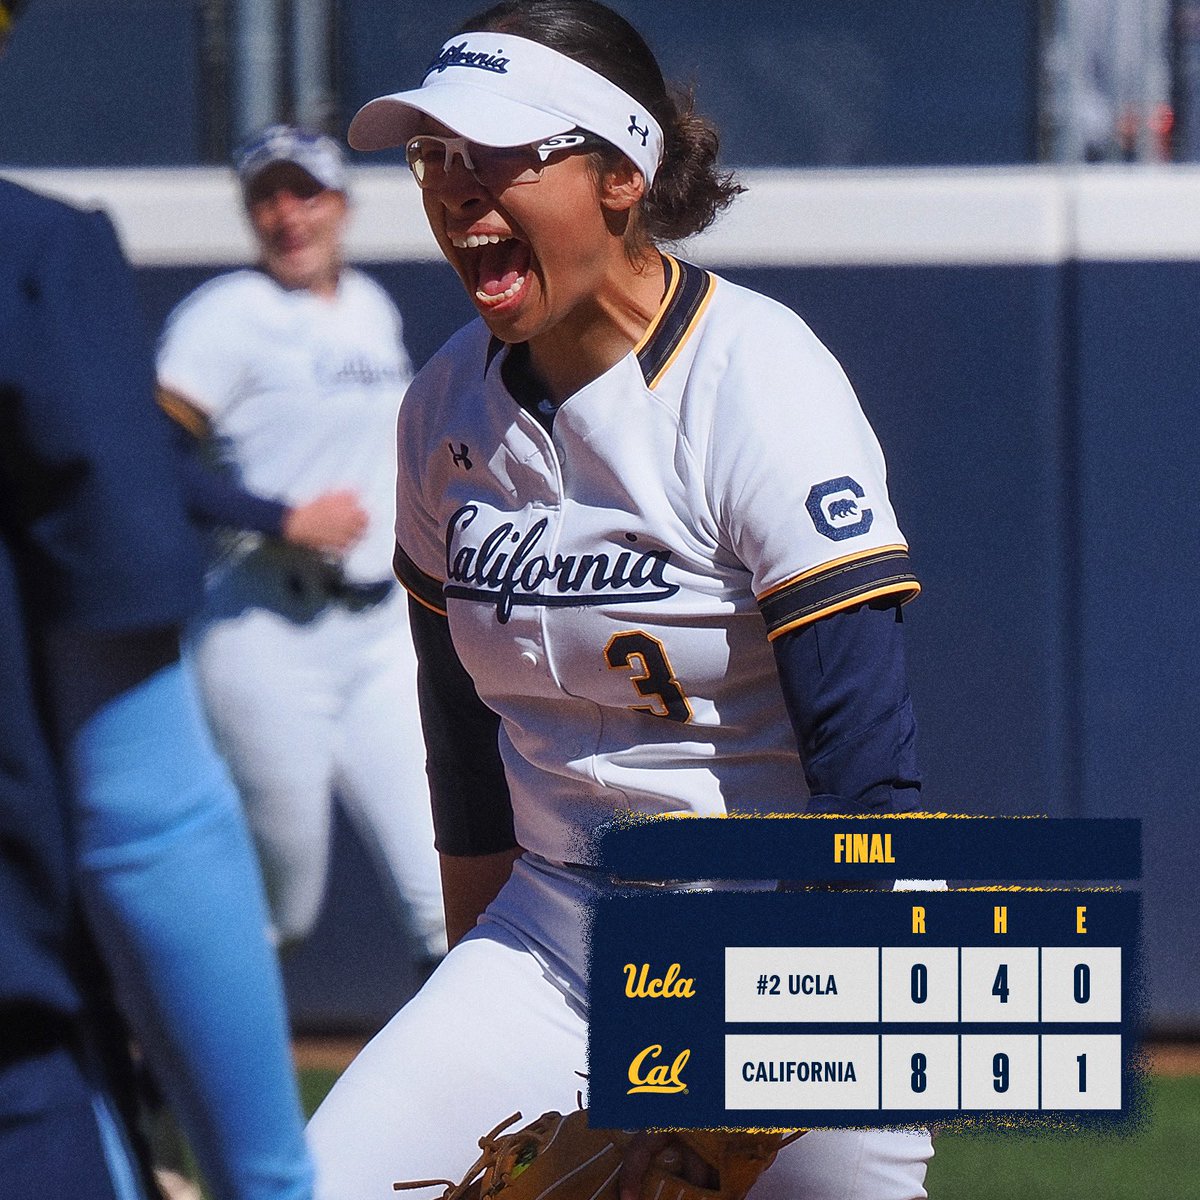 BEARS WIN! 🤟 Cal run-rules #2 UCLA in five for its first win against the Bruins since 2013! #GoBears